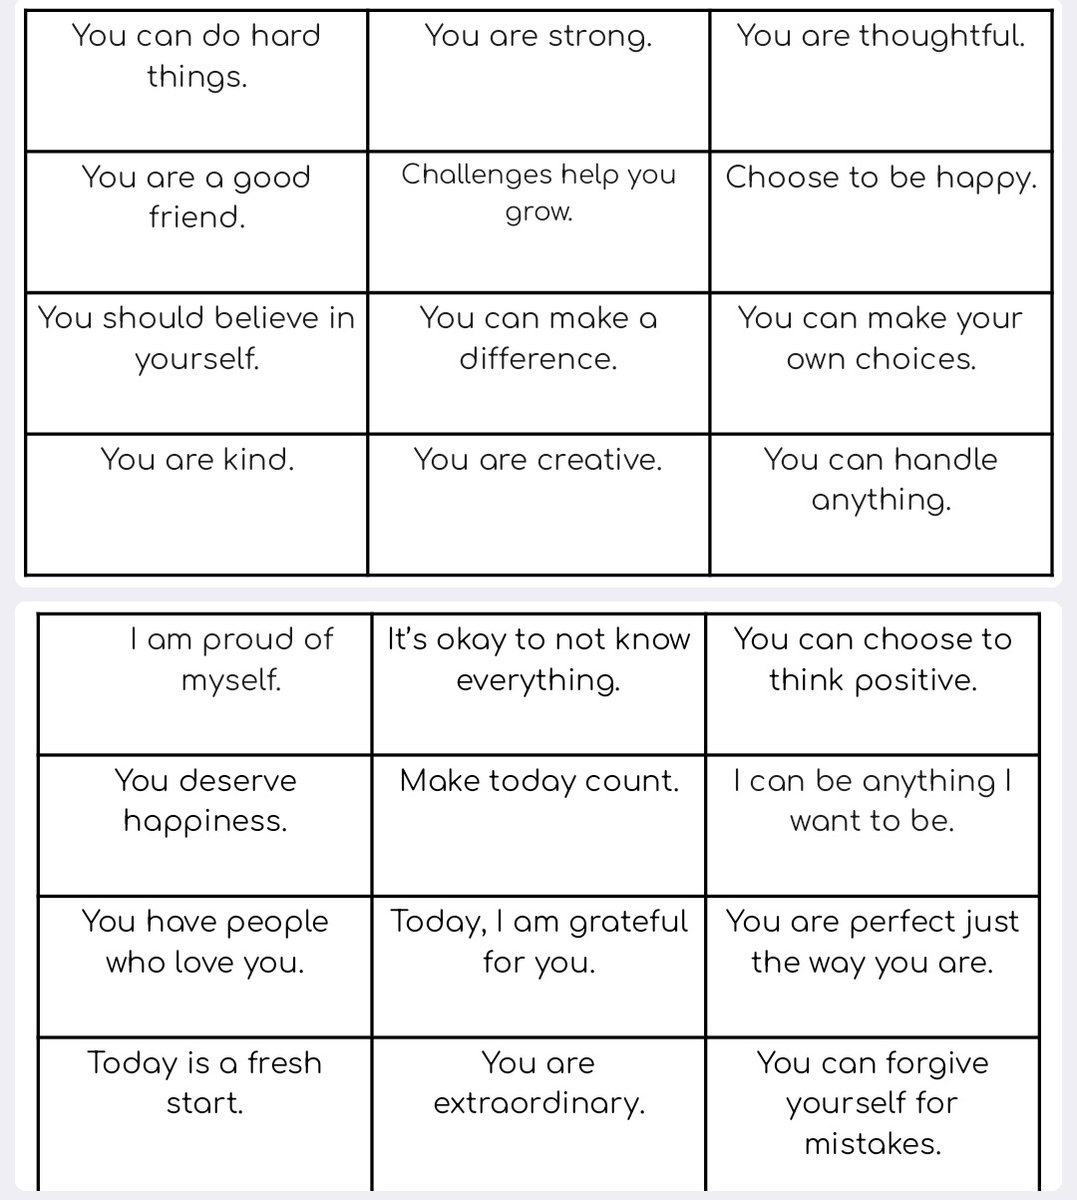 When Ss are feeling discouraged, a few positive words can go a long way. ❤️️ Check out this collection of affirmations that T @ElemPE1 created to share with Ss! ⬇️ #TeachPos